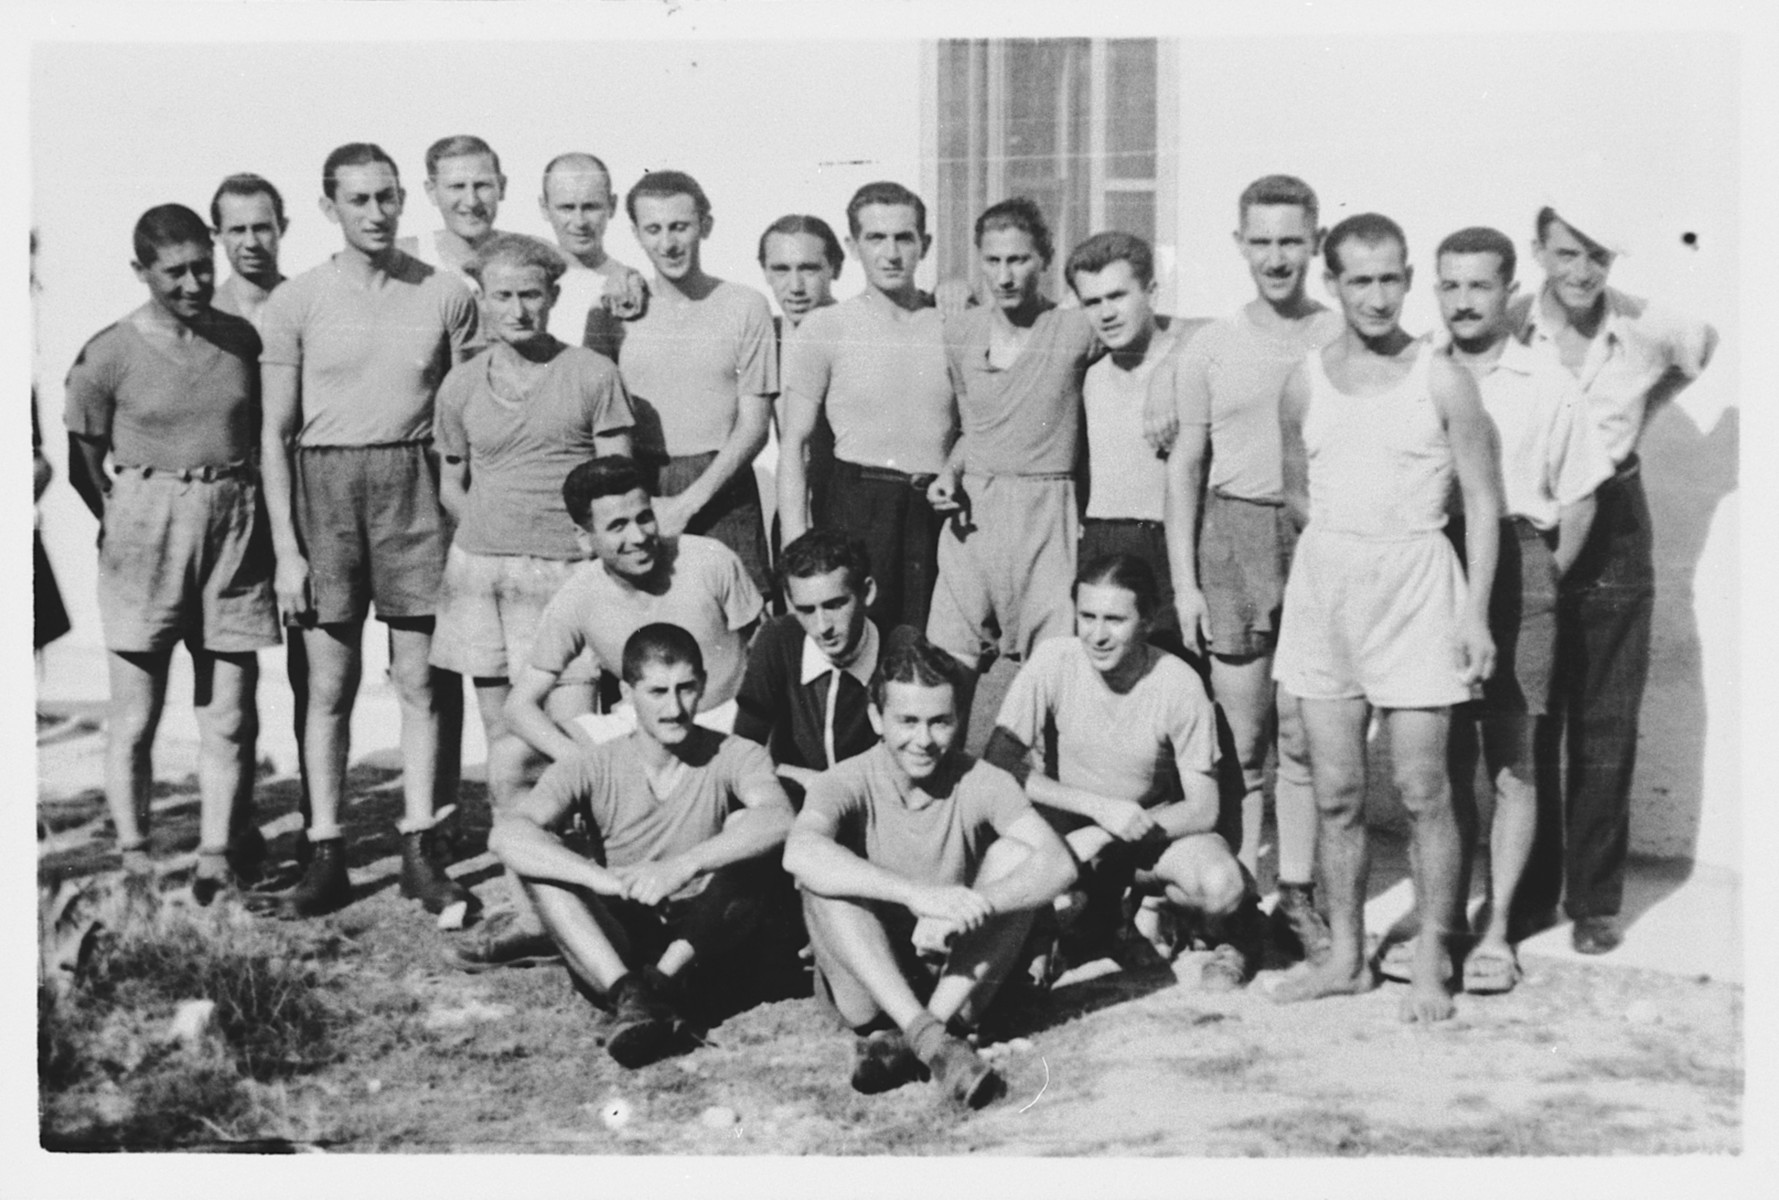 Group portrait of a soccer team in the Ferramonti camp.

This photograph was taken during a visit by Rabbi Pacifici to the internees.